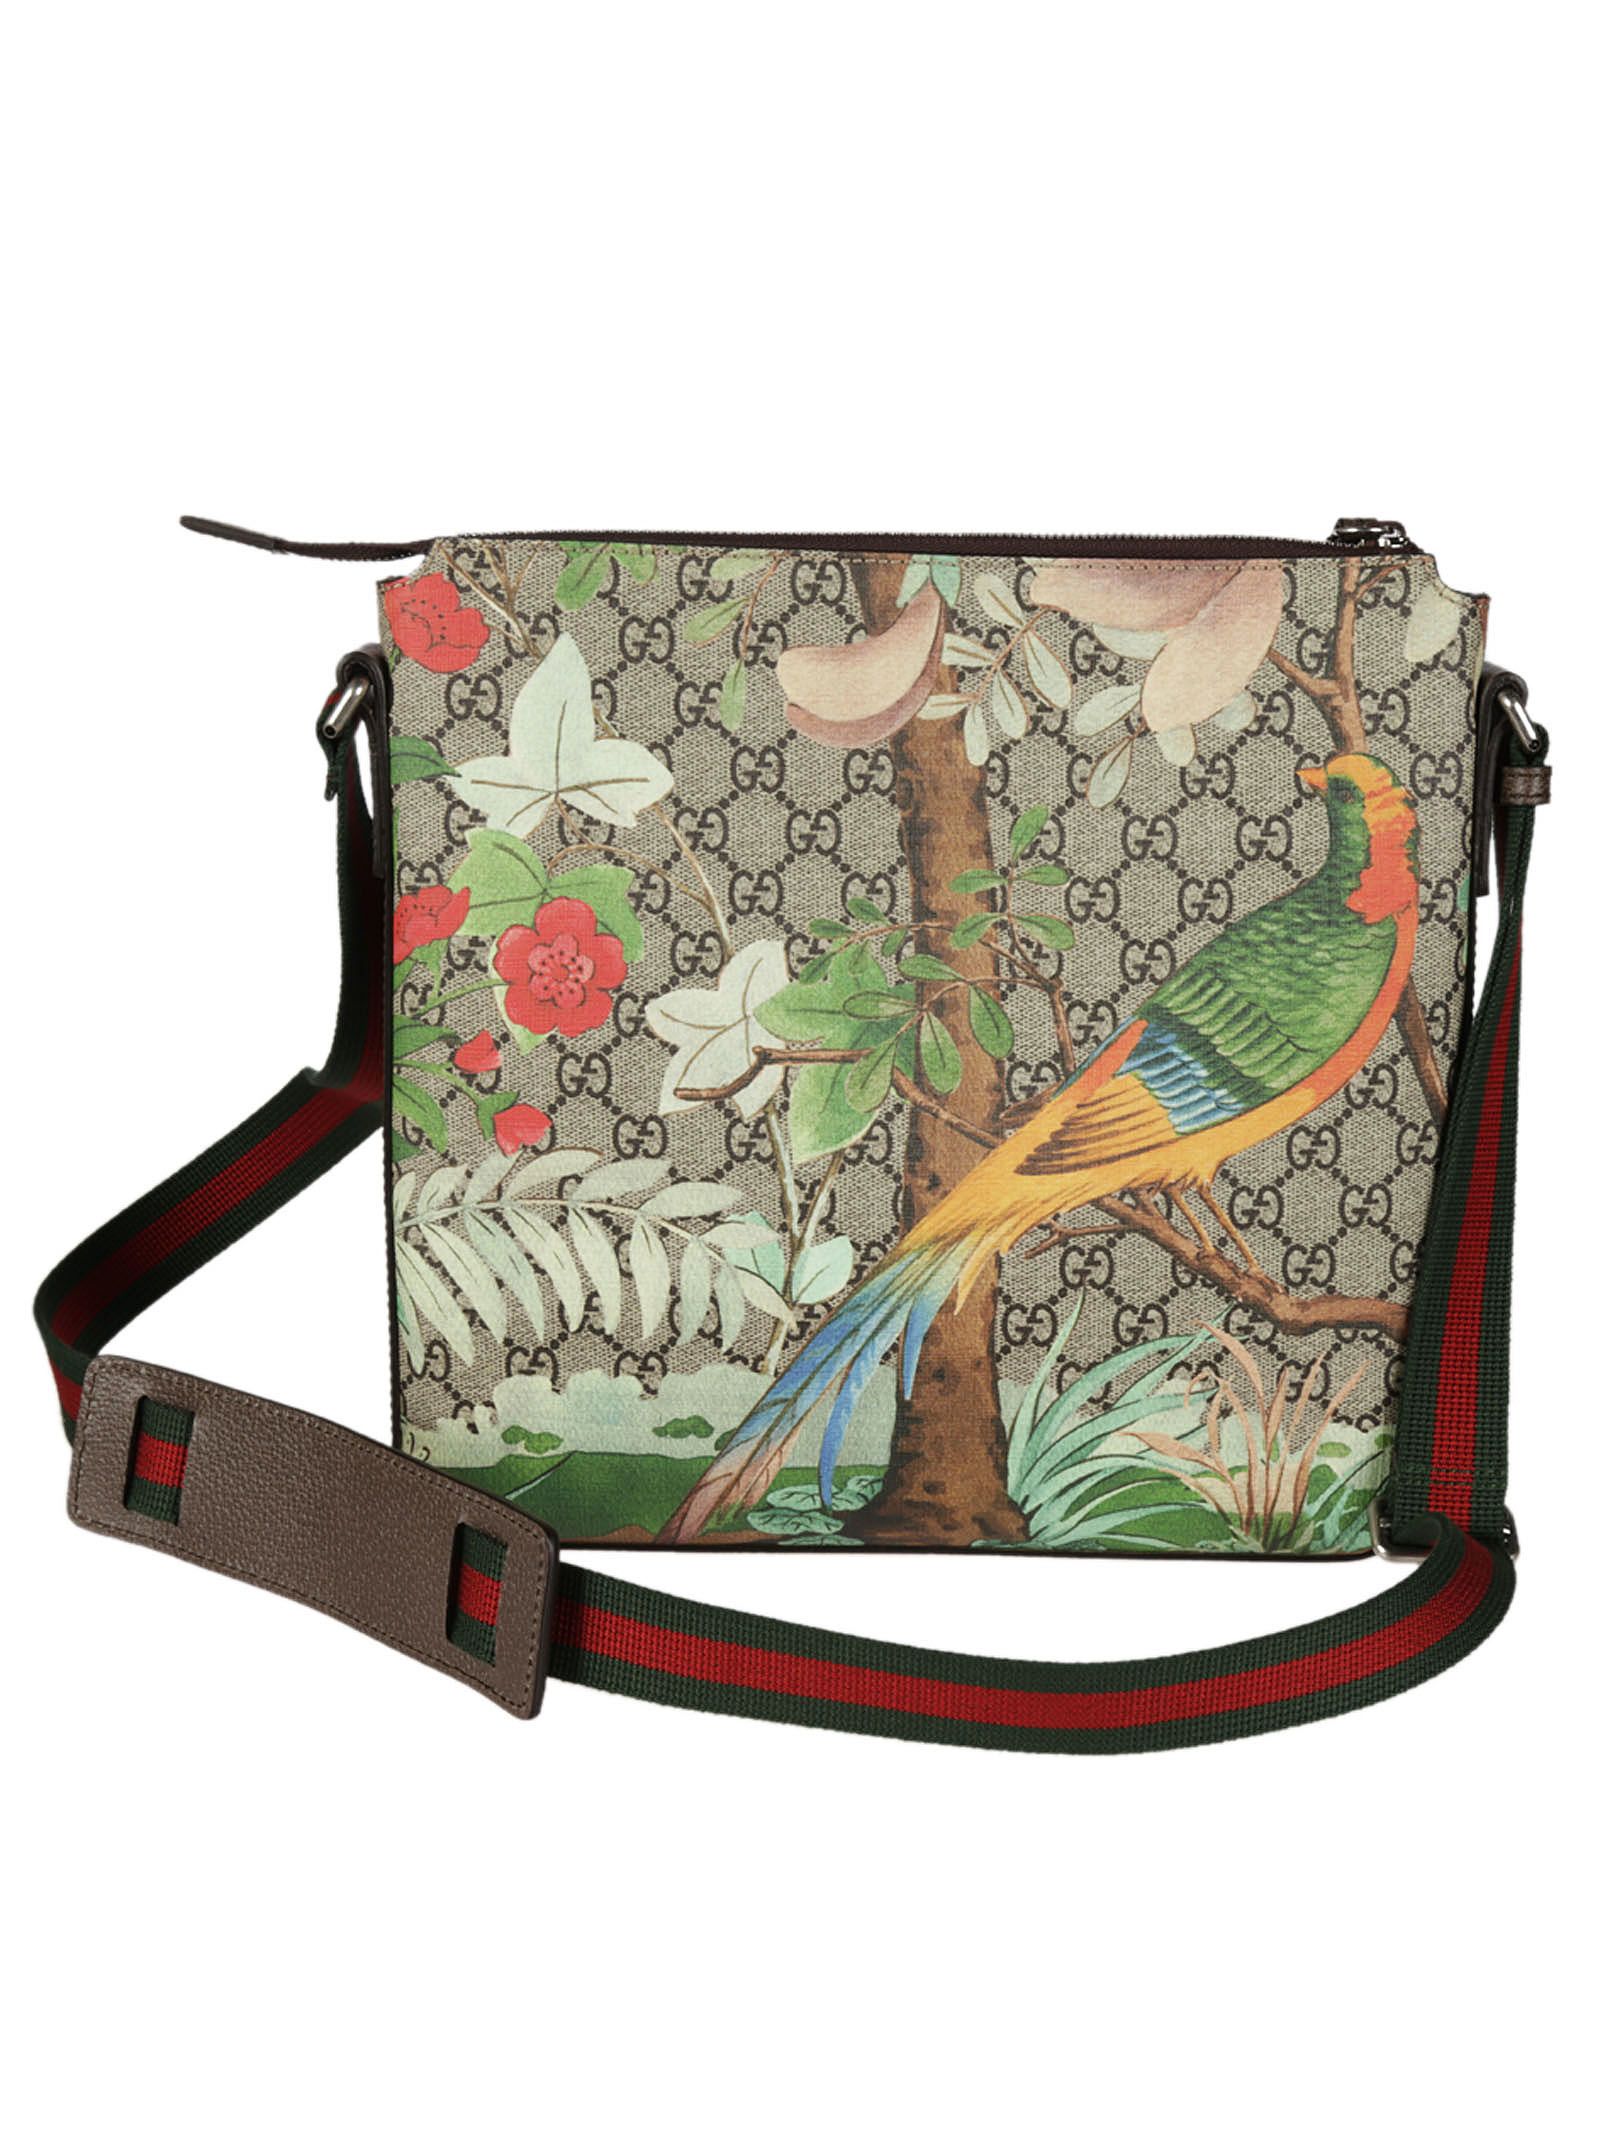 italist | Best price in the market for Gucci Gucci Tian GG Supreme Messenger Bag - Cacao ...